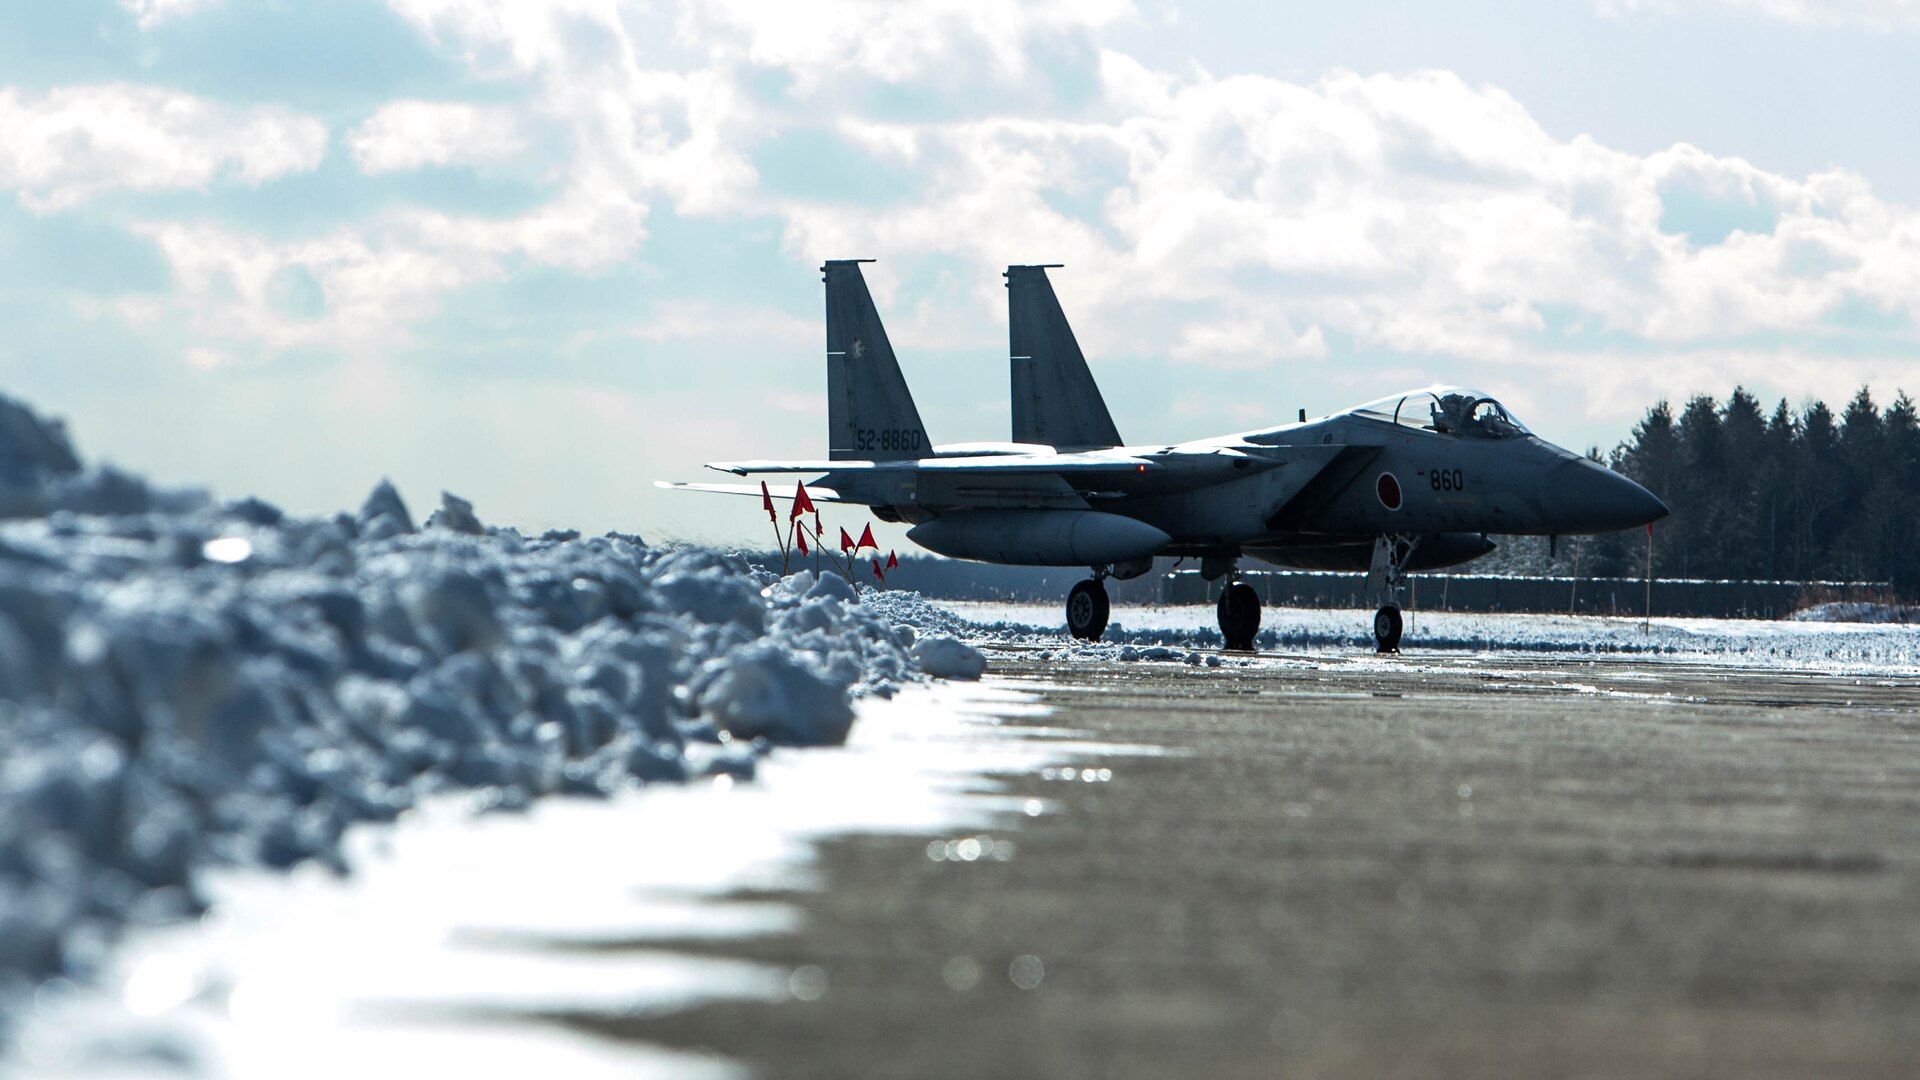 A Japan Air Self Defense Force F-15 taxis down the runway during the Aviation Training Relocation Program at Chitose Air Base, Japan, Dec. 8, 2016. The ATR is an effort to increase operational readiness between the U.S. Marine Corps and the Japan Air Self Defense Force, improve interoperability and reduce noise concerns of aviation training on local communities by disseminating training locations throughout Japan. (U.S. Marine Corps photo by Lance Cpl. Joseph Abrego)